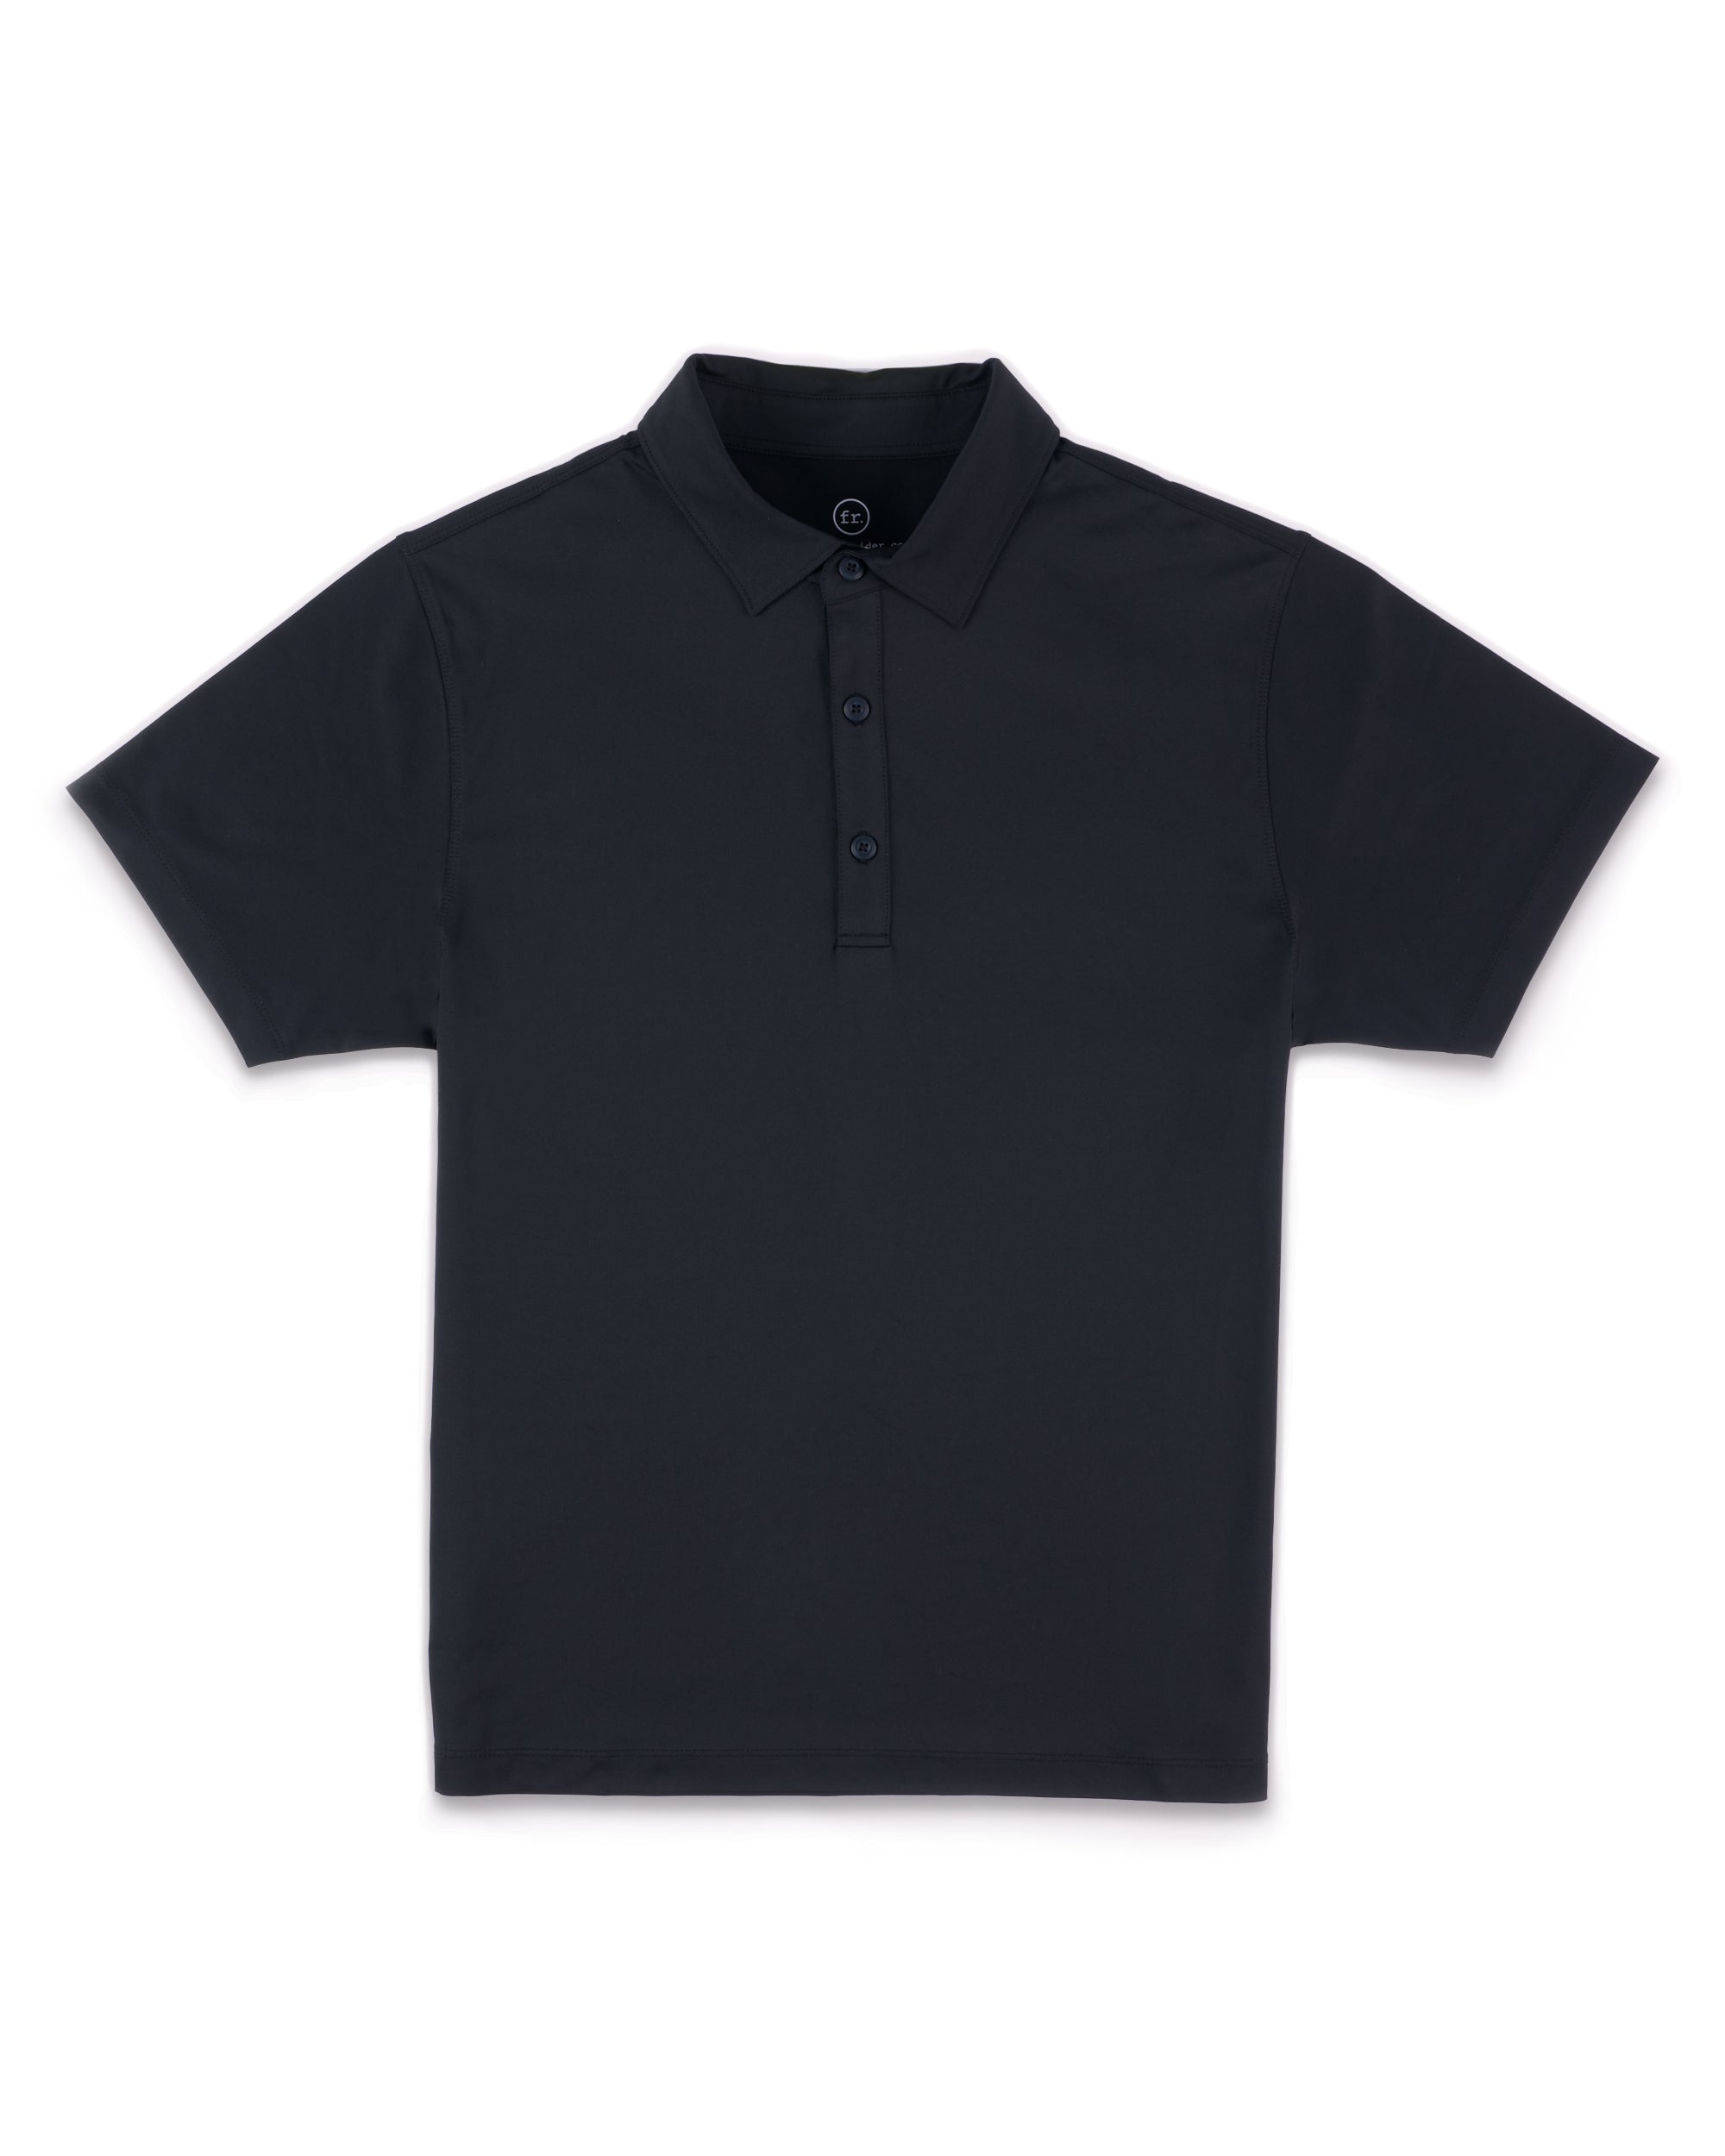 Performance Polo Black - Foreign Rider Co.